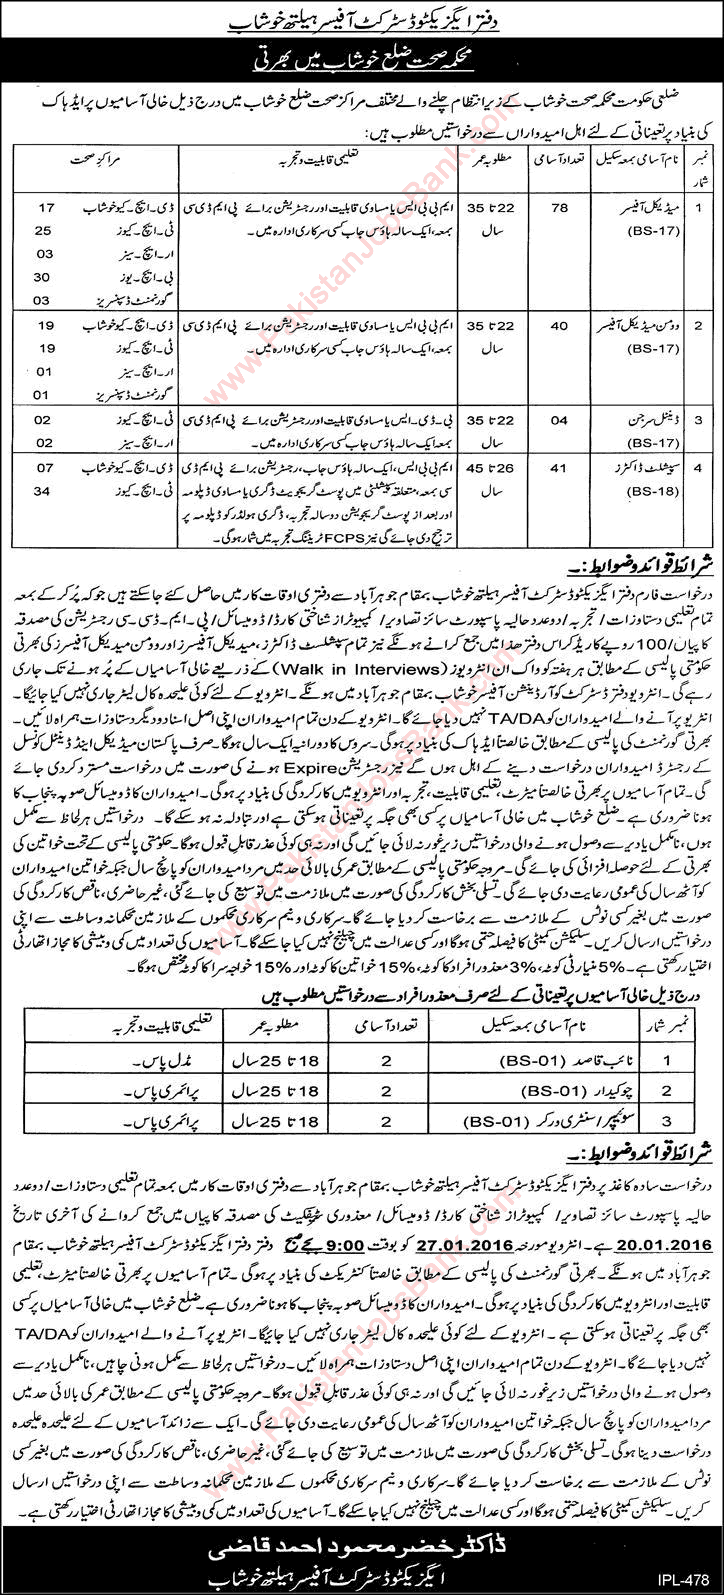 Health Department Khushab Jobs 2016 Medical Officers, Specialists Doctors, Dental Surgeons & Others Latest